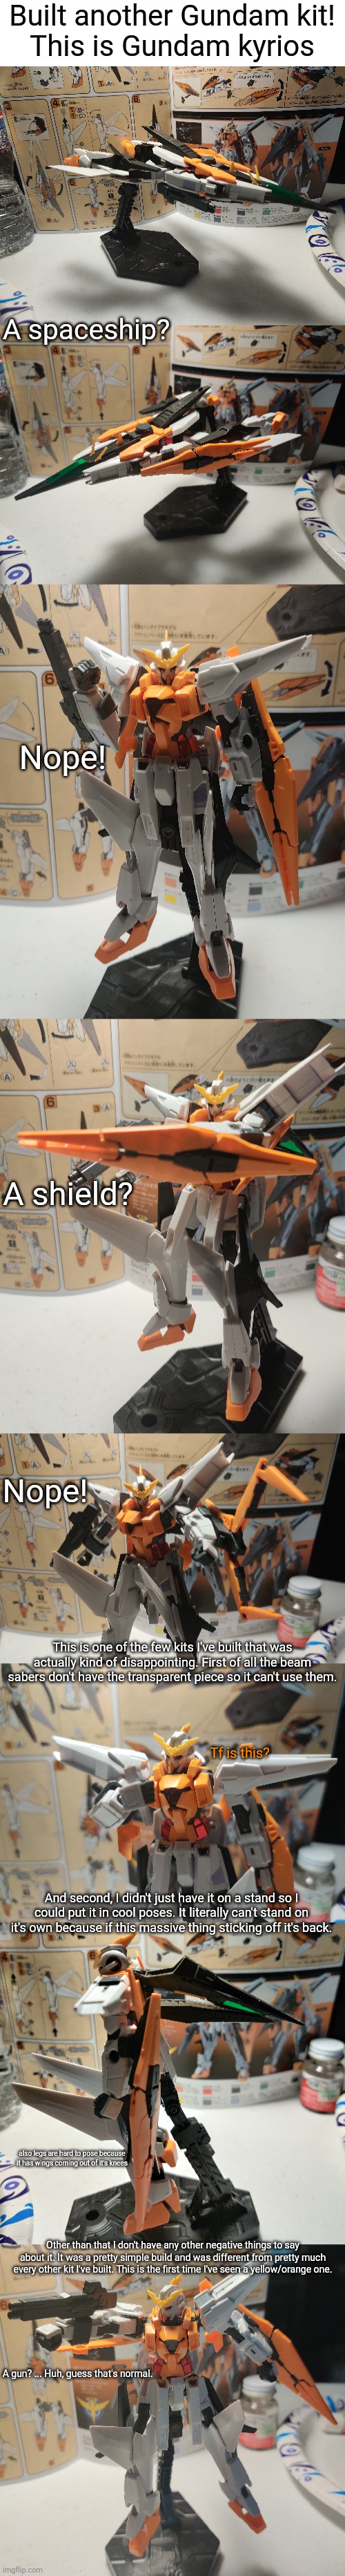 Overall a pretty good kit even though it has some problems. | Built another Gundam kit!
This is Gundam kyrios; A spaceship? Nope! A shield? Nope! This is one of the few kits I've built that was actually kind of disappointing. First of all the beam sabers don't have the transparent piece so it can't use them. Tf is this? And second, I didn't just have it on a stand so I could put it in cool poses. It literally can't stand on it's own because if this massive thing sticking off it's back. also legs are hard to pose because it has wings coming out of it's knees; Other than that I don't have any other negative things to say about it. It was a pretty simple build and was different from pretty much every other kit I've built. This is the first time I've seen a yellow/orange one. A gun? ... Huh, guess that's normal. | image tagged in blank white template | made w/ Imgflip meme maker